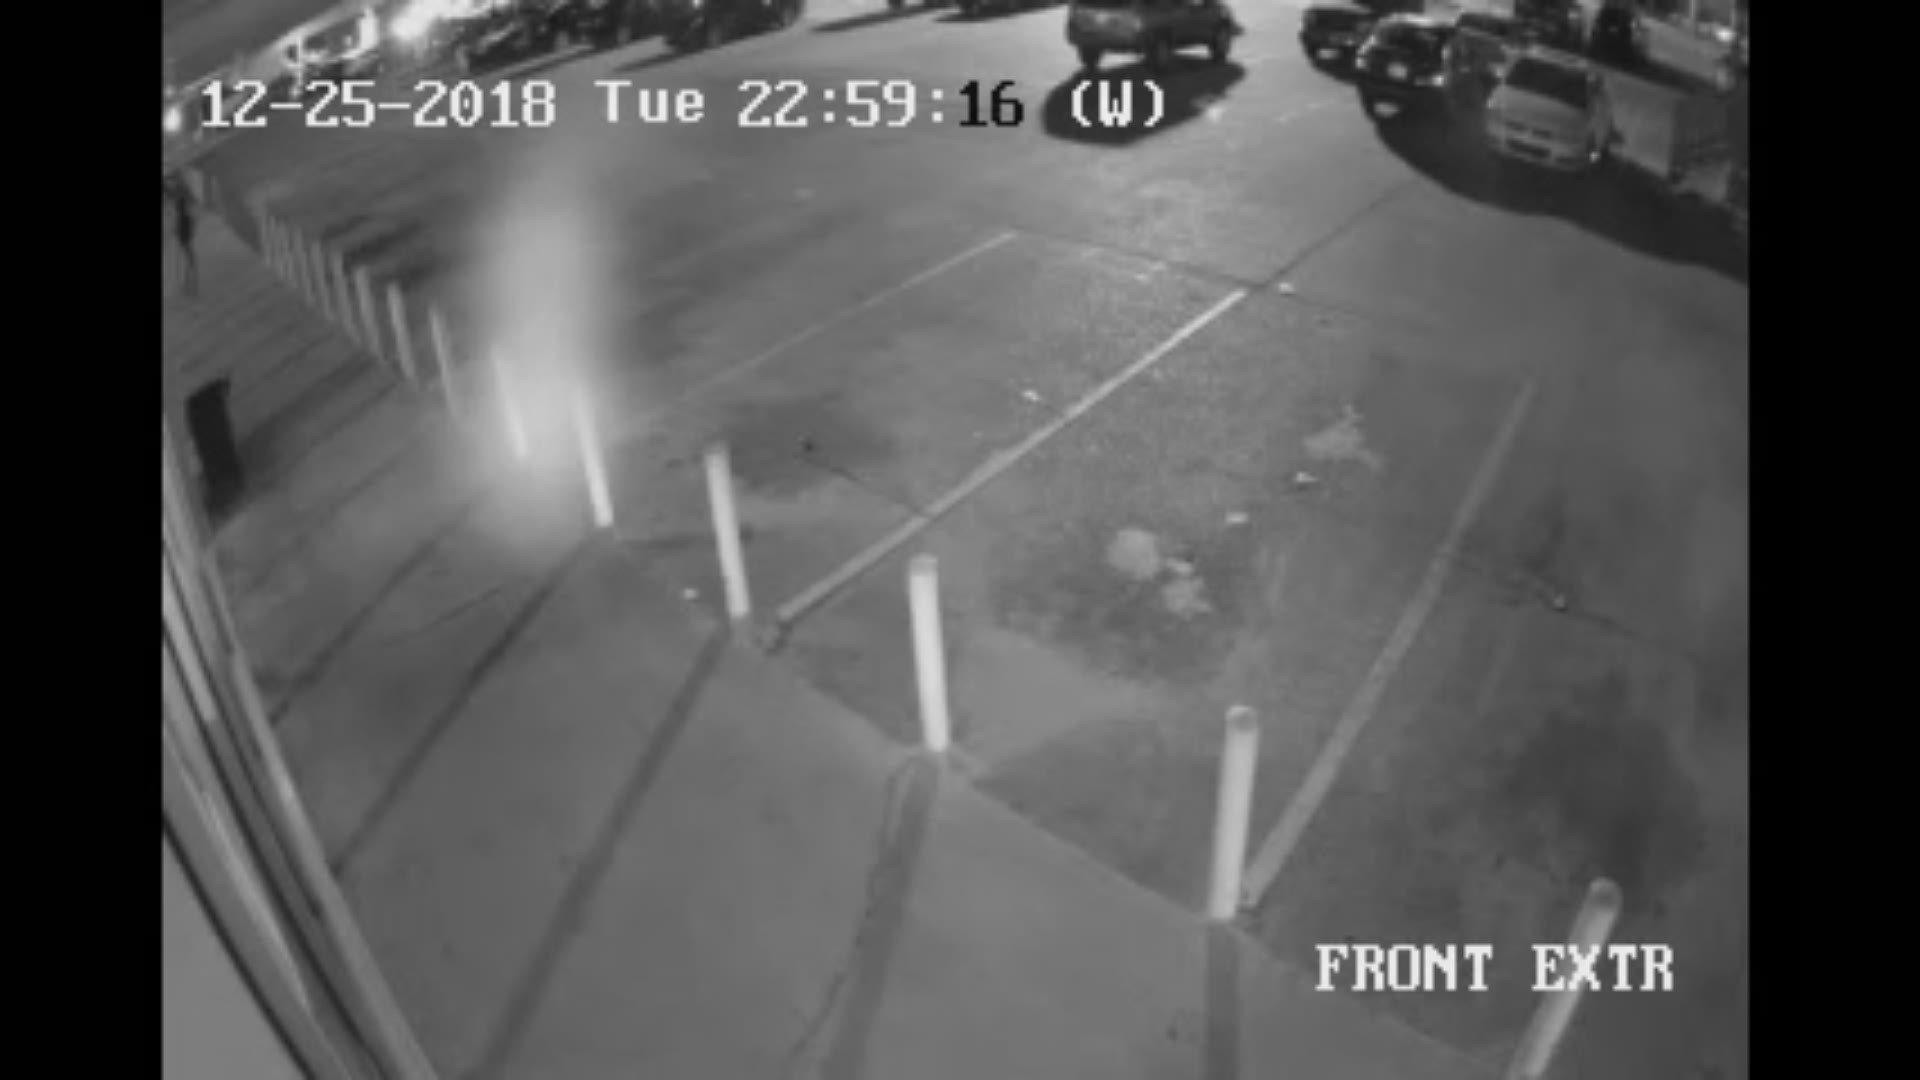 The NOPD is seeking to locate a person of interest for questioning in the investigation of an aggravated criminal damage to property incident that occurred on December 25, 2018 in the 7300 block of Read Boulevard.